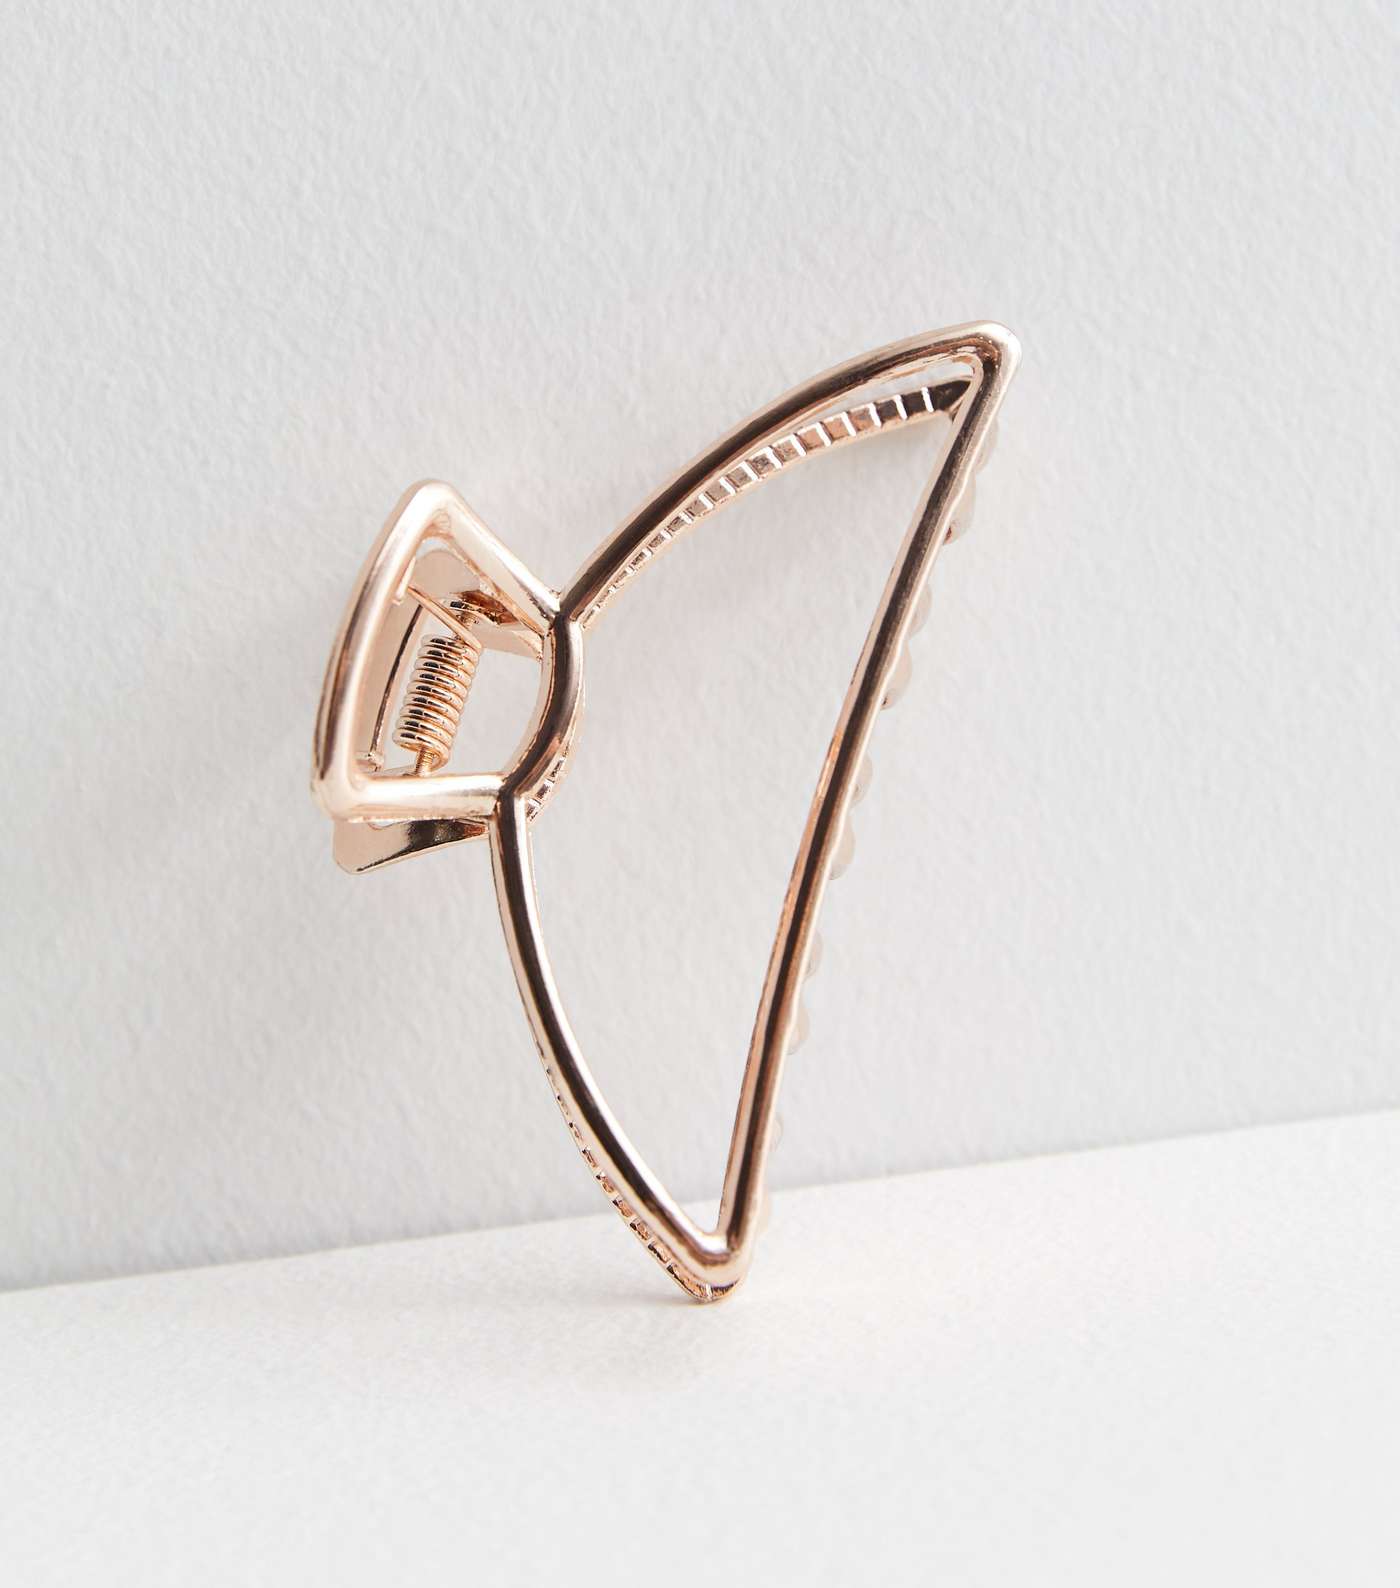 Rose Gold Metal Curved Hair Claw Clip